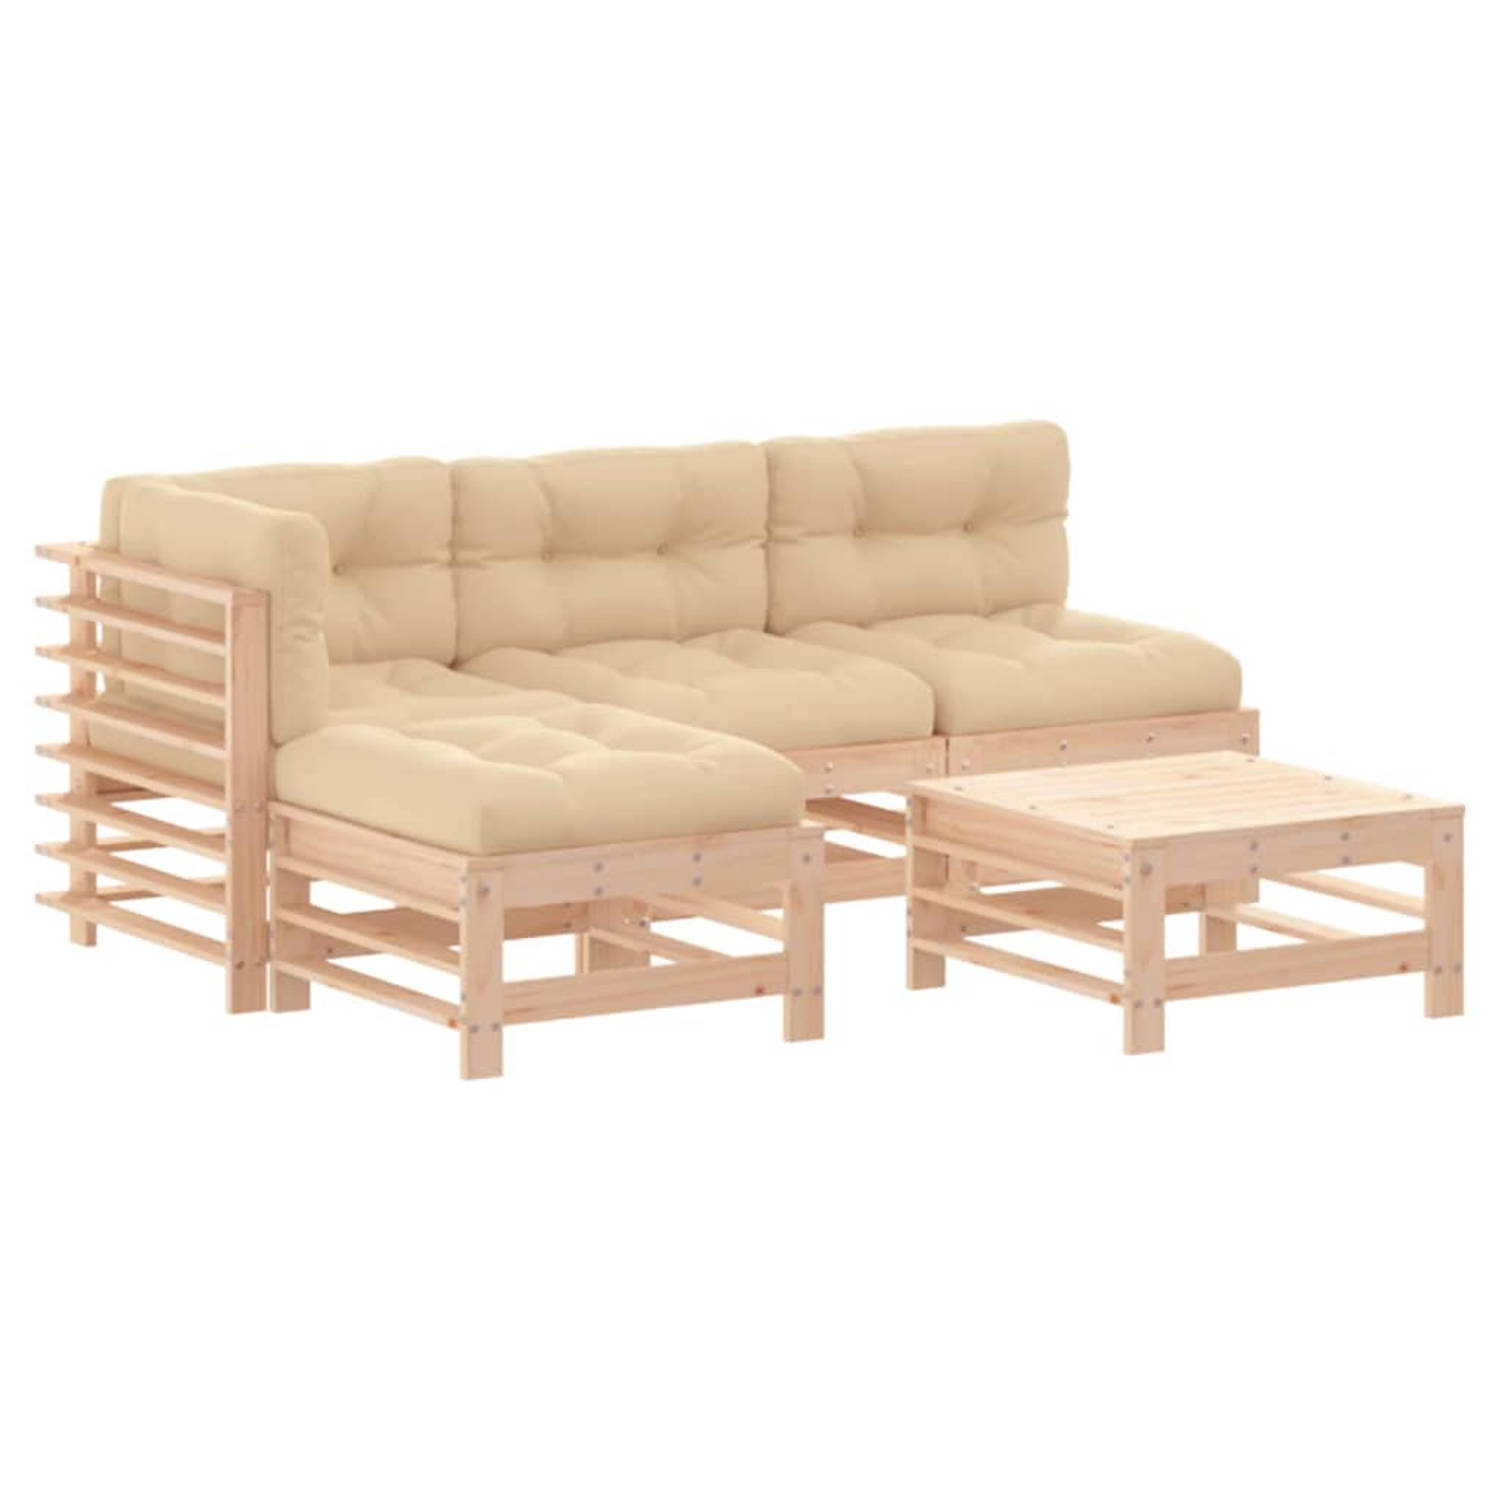 The Living Store Loungeset - Massief Grenenhout - Modulair - Inclusief Kussens - Beige